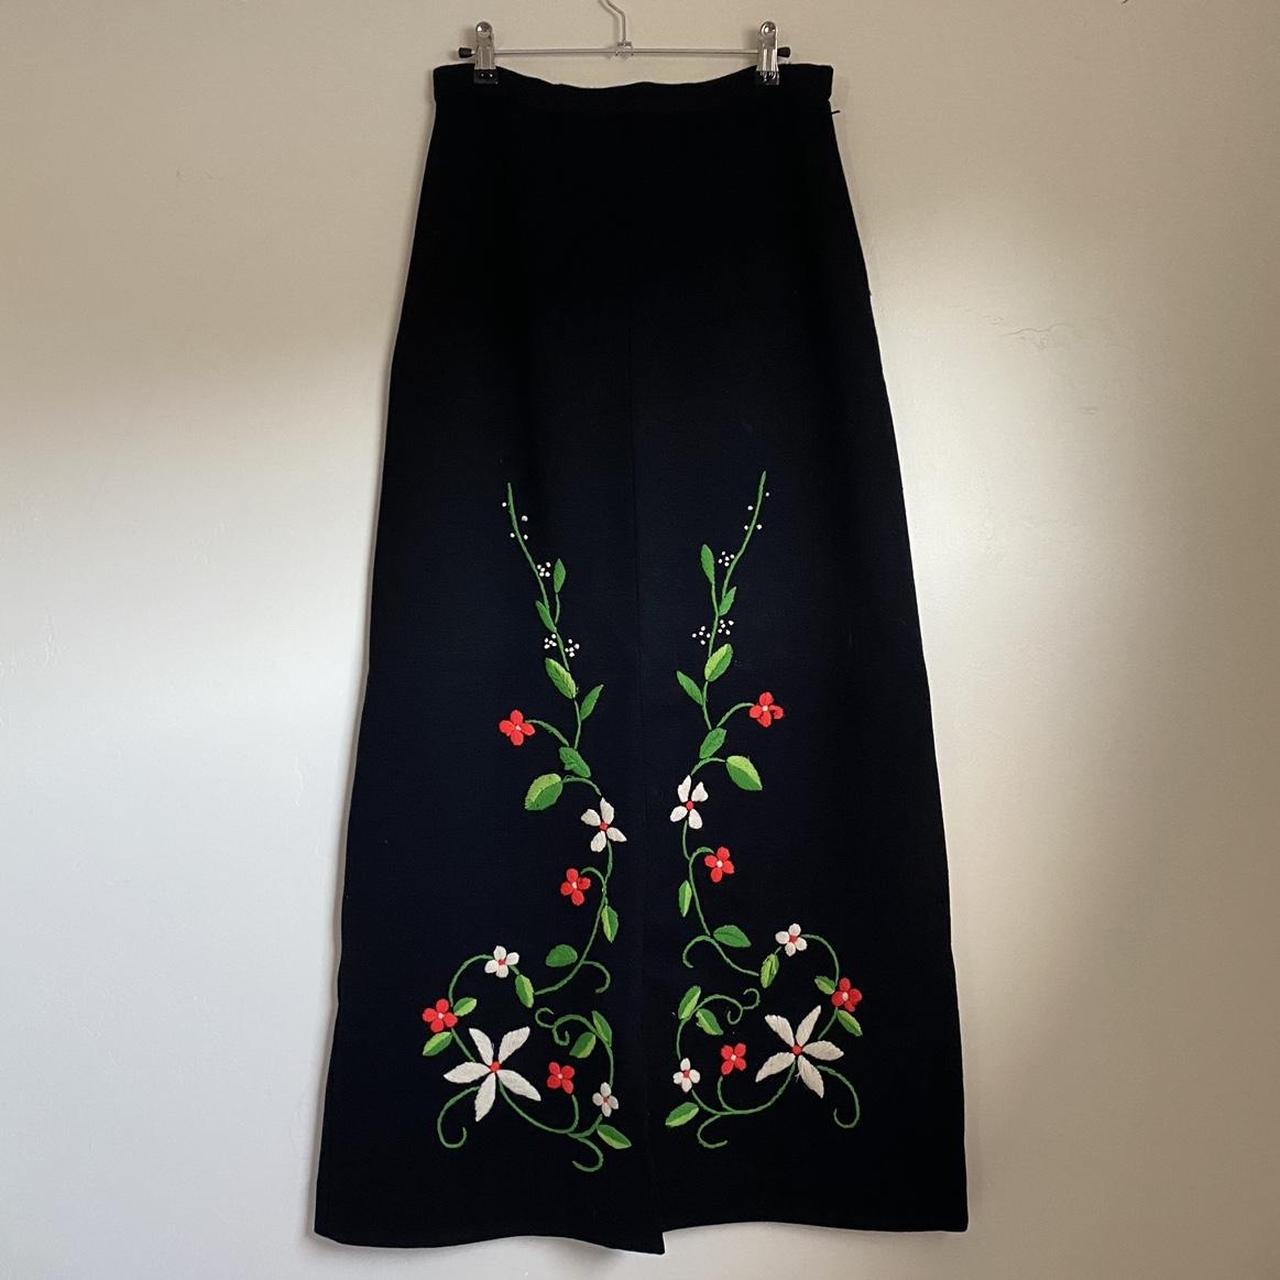 Vintage embroidered maxi skirt -heavy knit maxi... - Depop